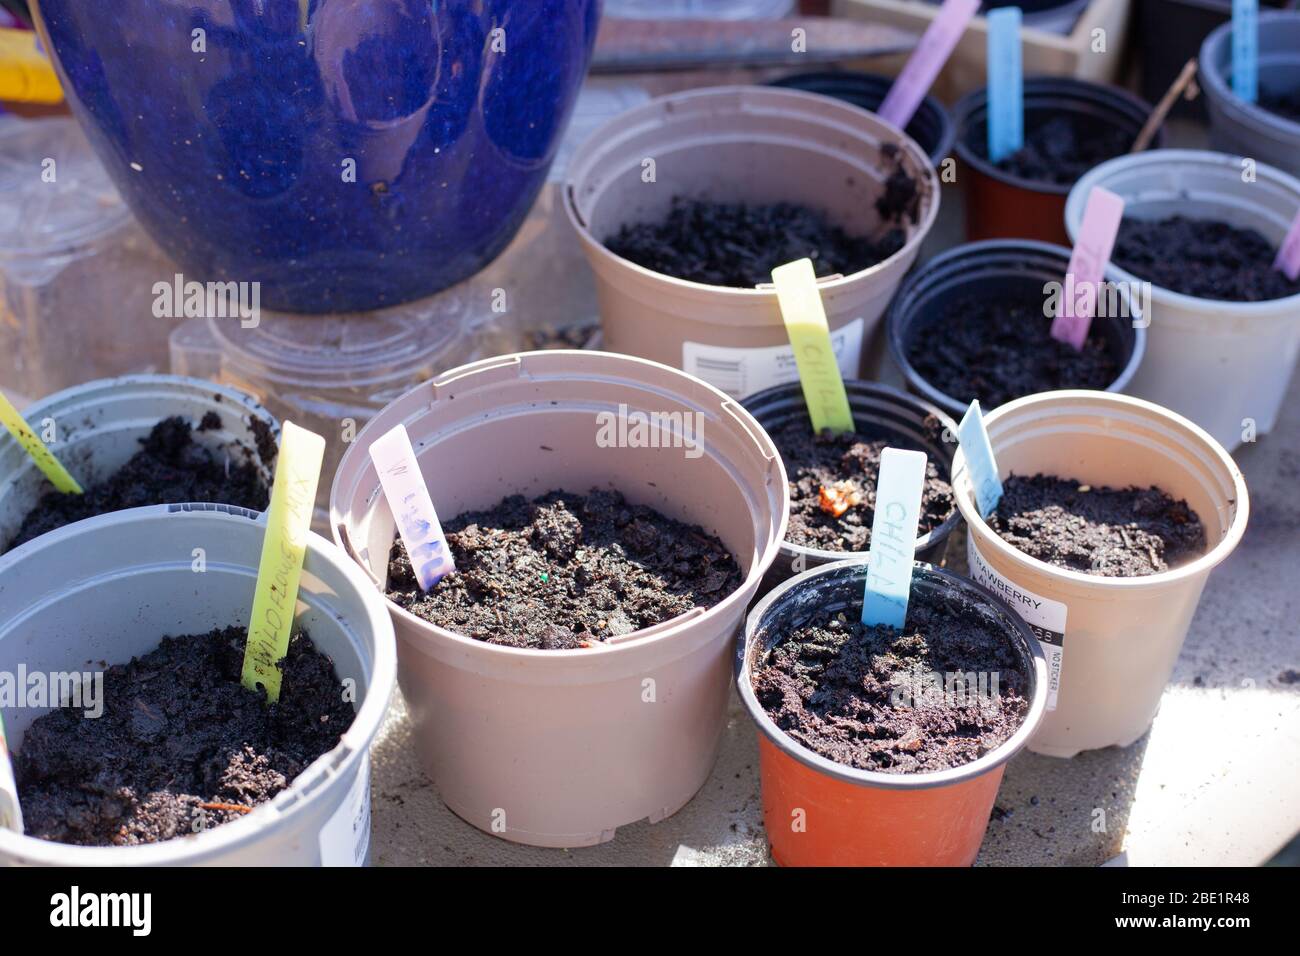 Healthy Lifestyles - Sowing vegetable seeds during Coronavirus lockdown can provide an escape from stress and many people are turning to gardening. Stock Photo